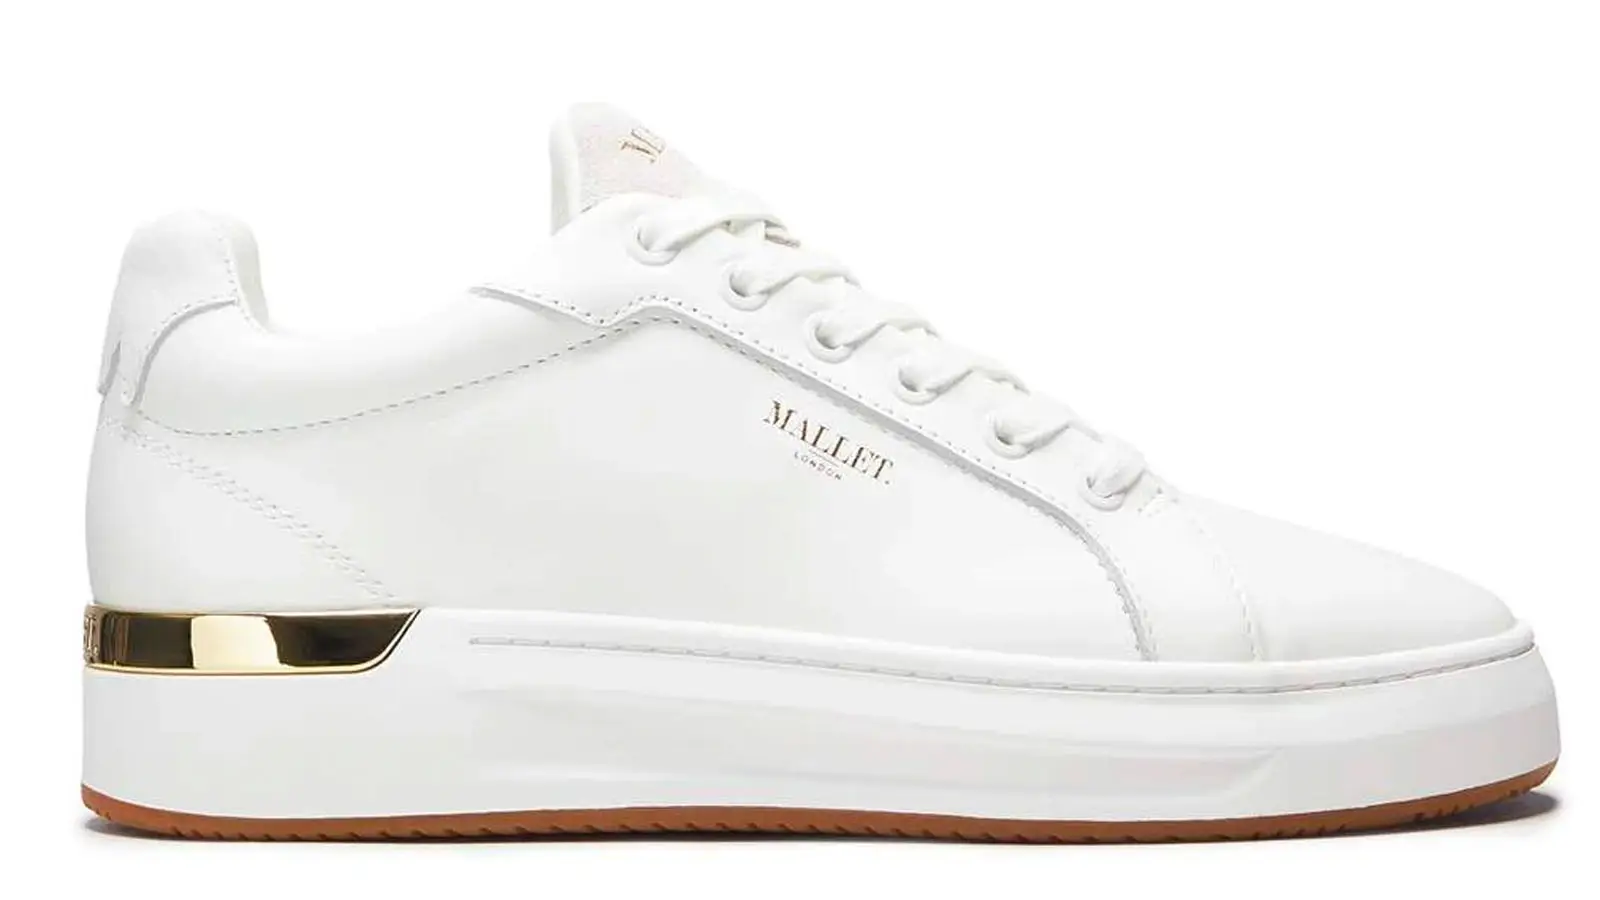 These Are The Sneakers From Miss Mallet Your Shoedrobe Needs | The Sole ...